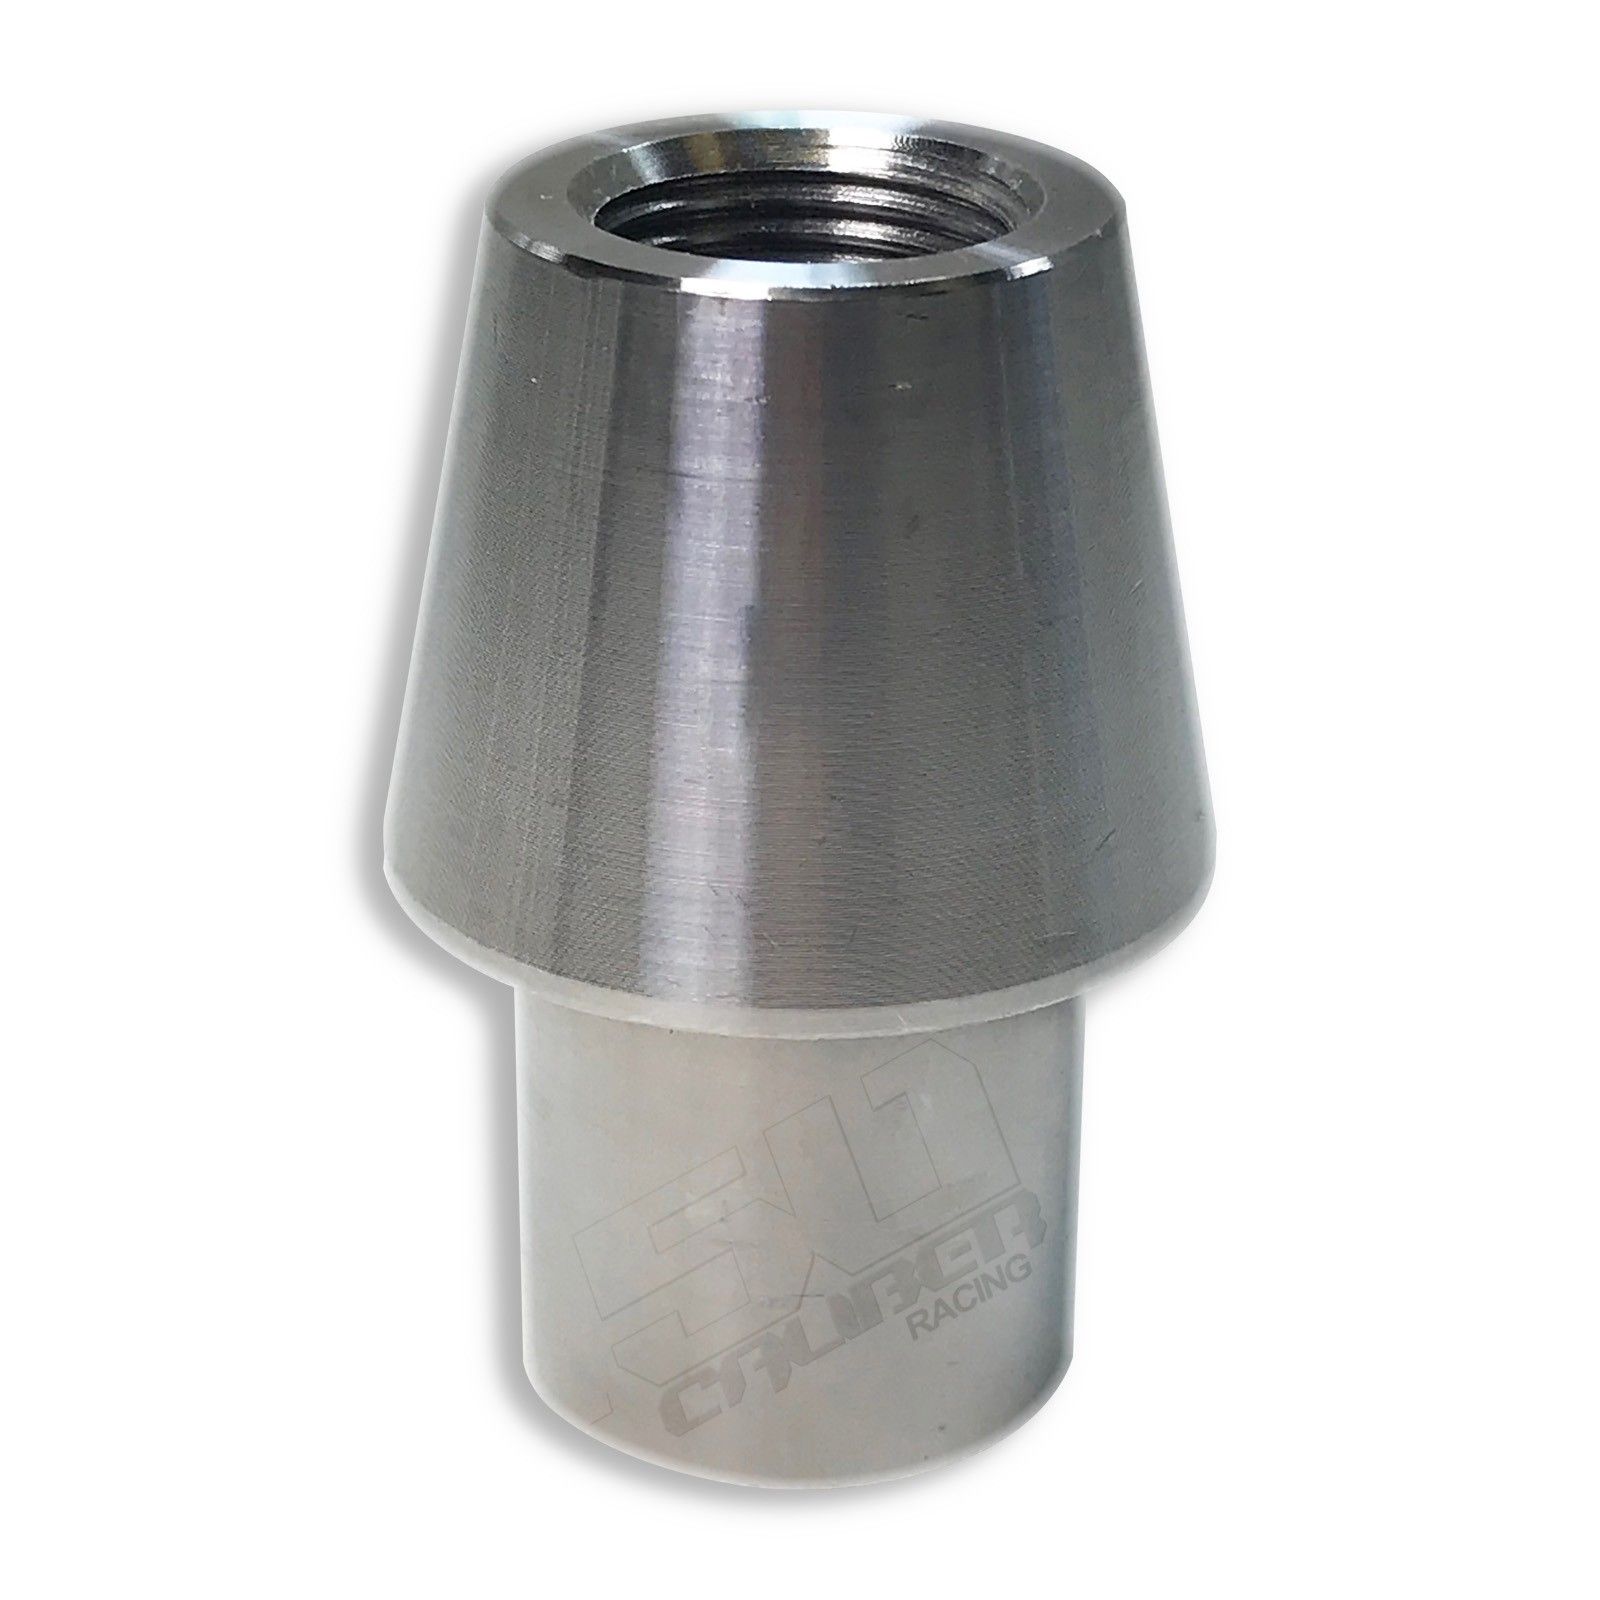 Pacific Customs Tube Connector Bung for 1.5 Inch OD Tube with .120 Inch Wall Thickness 